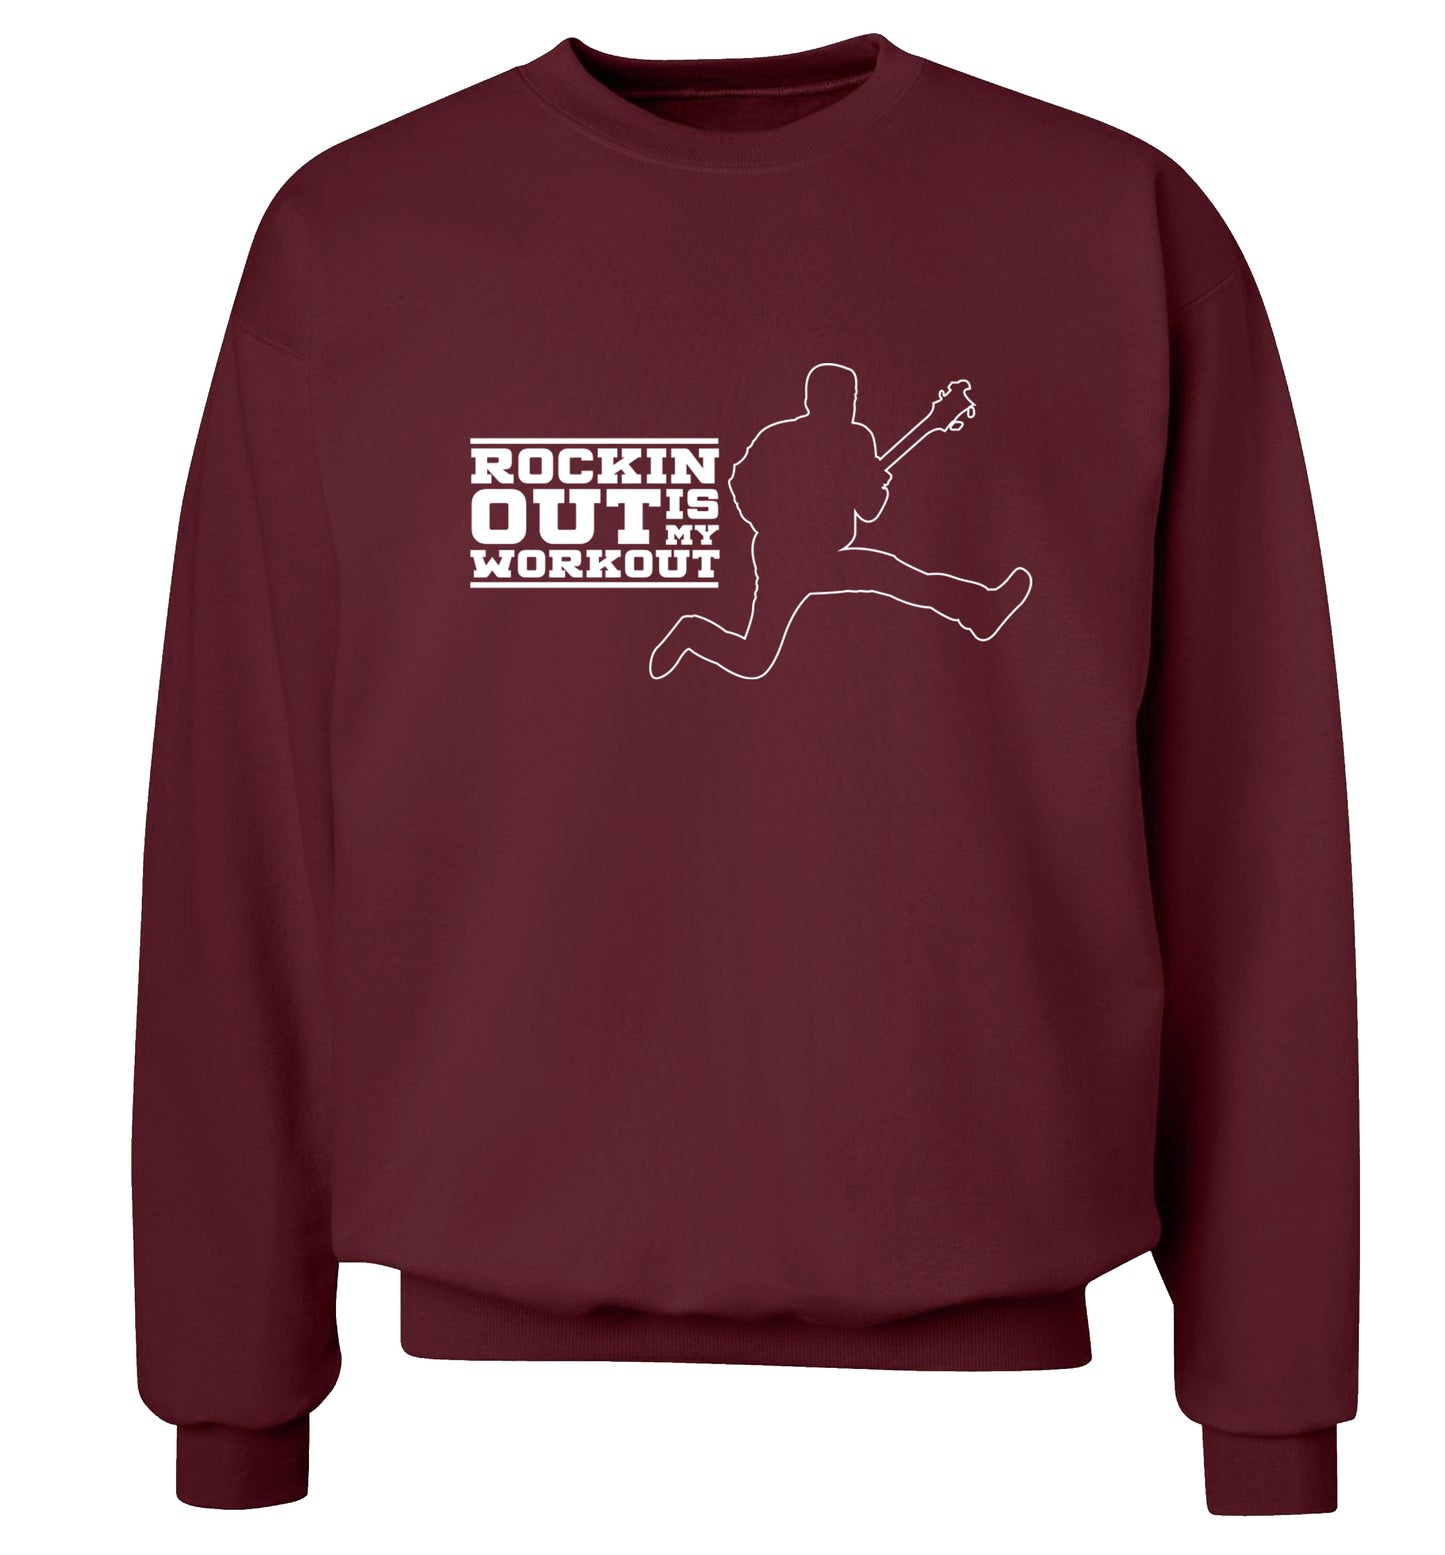 Rockin out is my workout Adult's unisex maroon Sweater 2XL